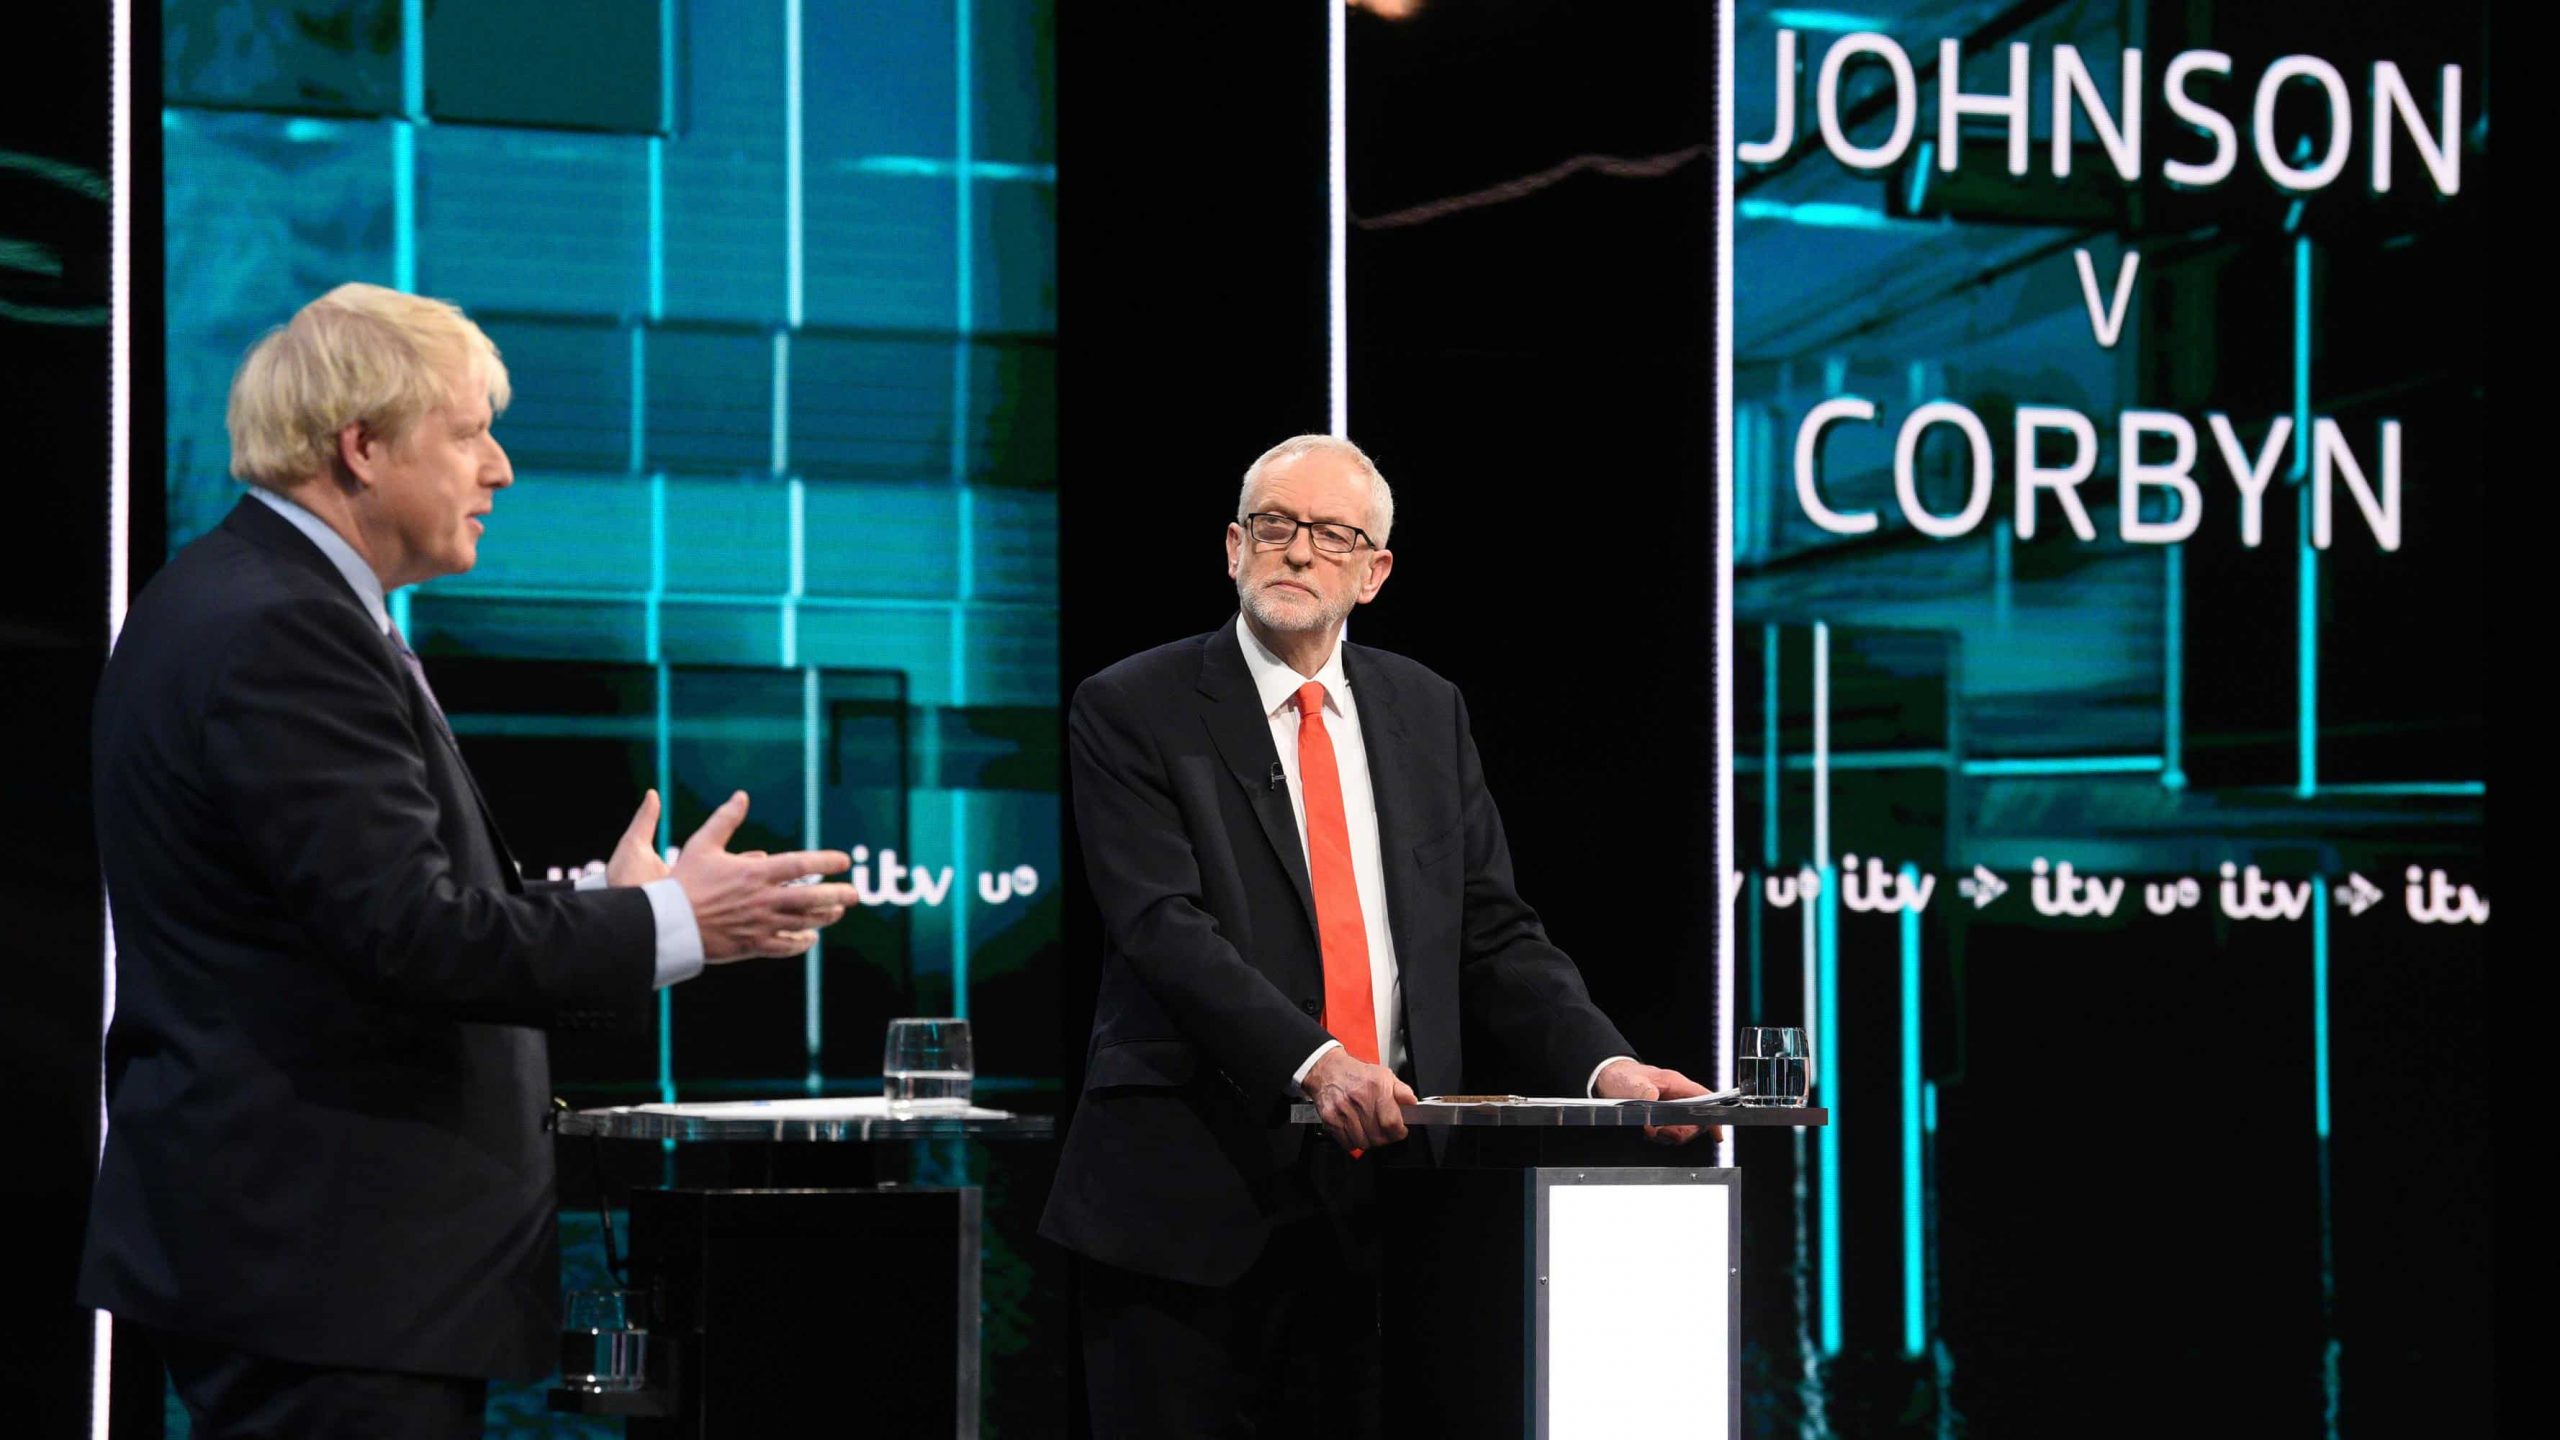 Corbyn “won clear victory” among undecided voters in TV debate